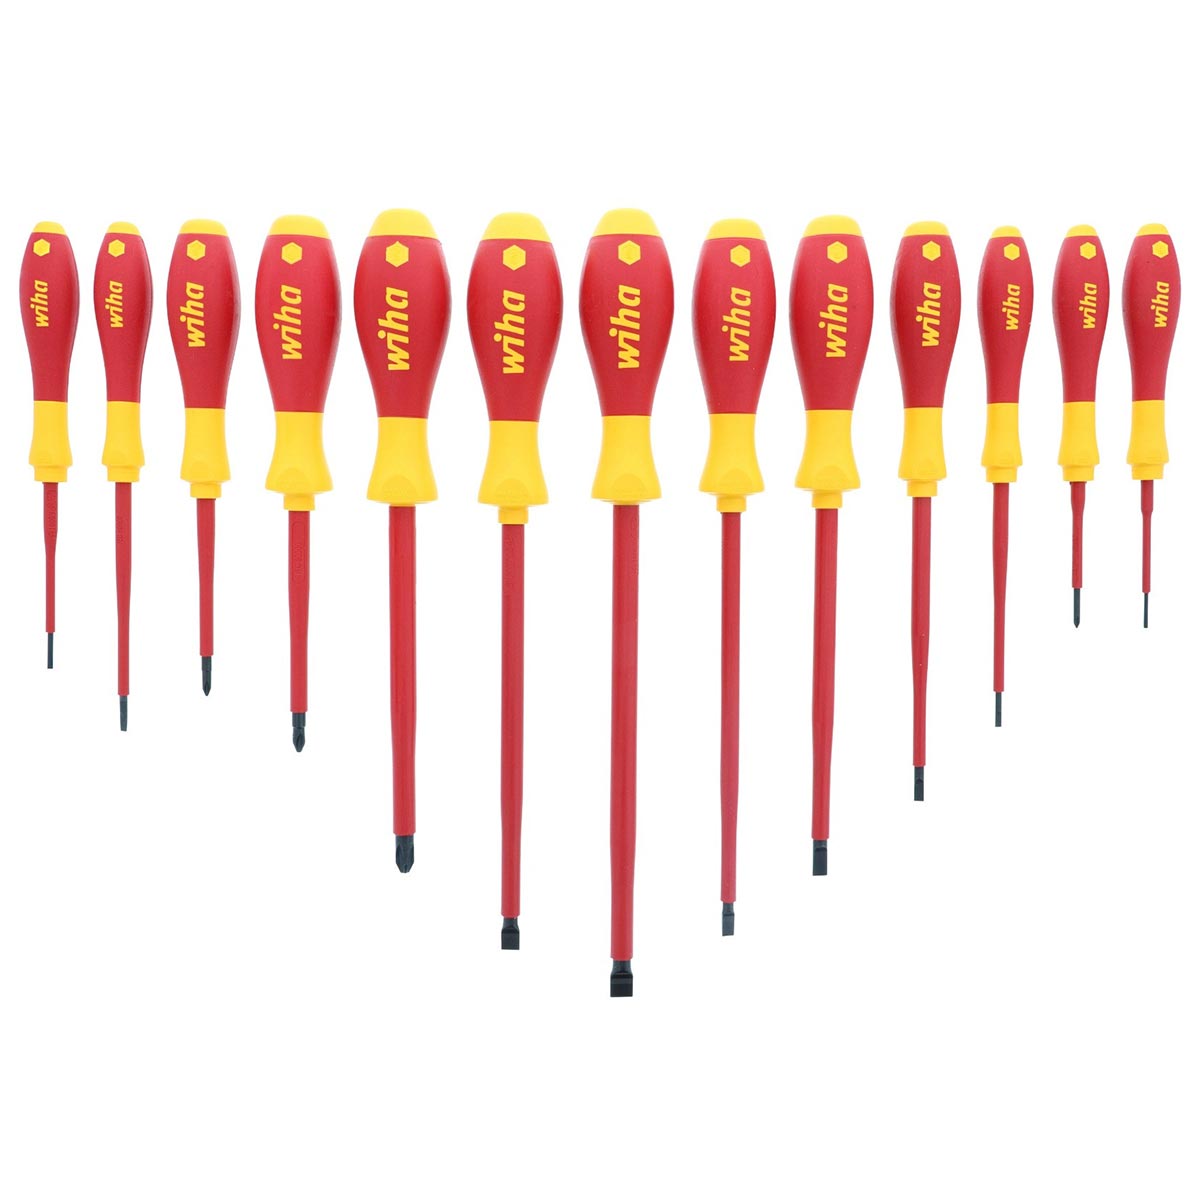 Wiha 32094 Insulated Cushioned Grip Slotted/Phillips Screwdrivers - 13 Piece Set